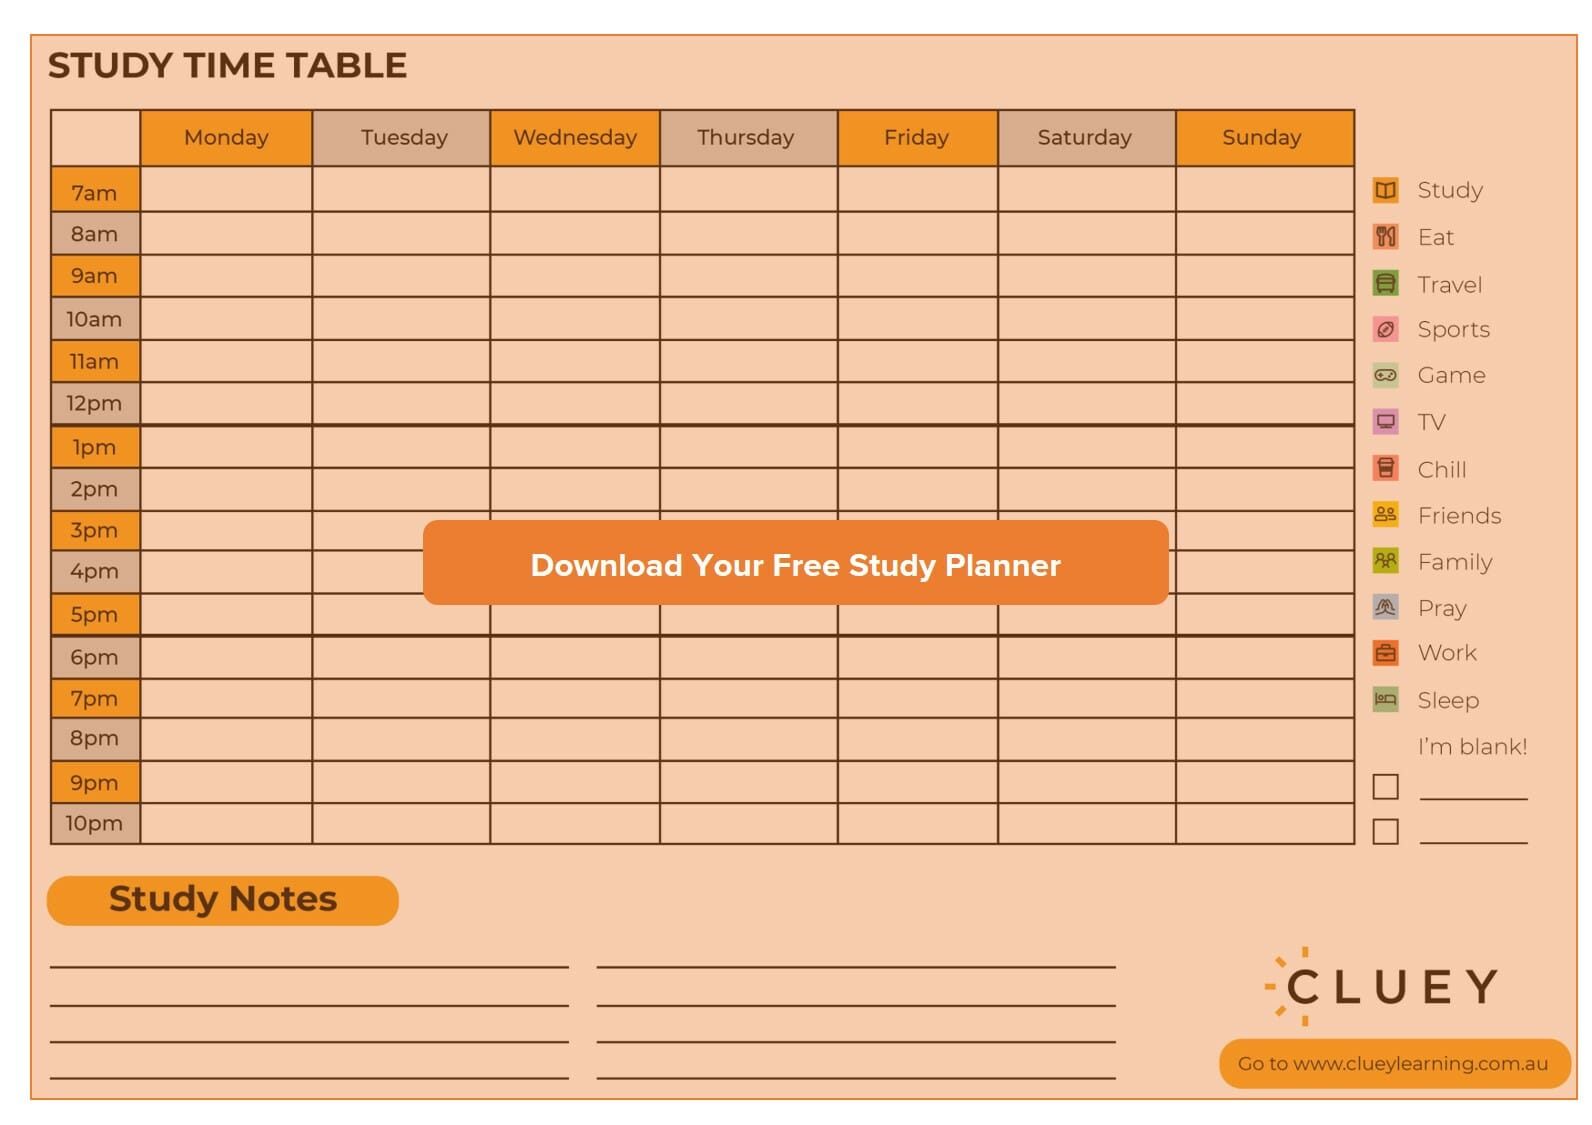 Cluey Learning Study Timetable Planner Download - clueylearning.com.au 1300 182 000